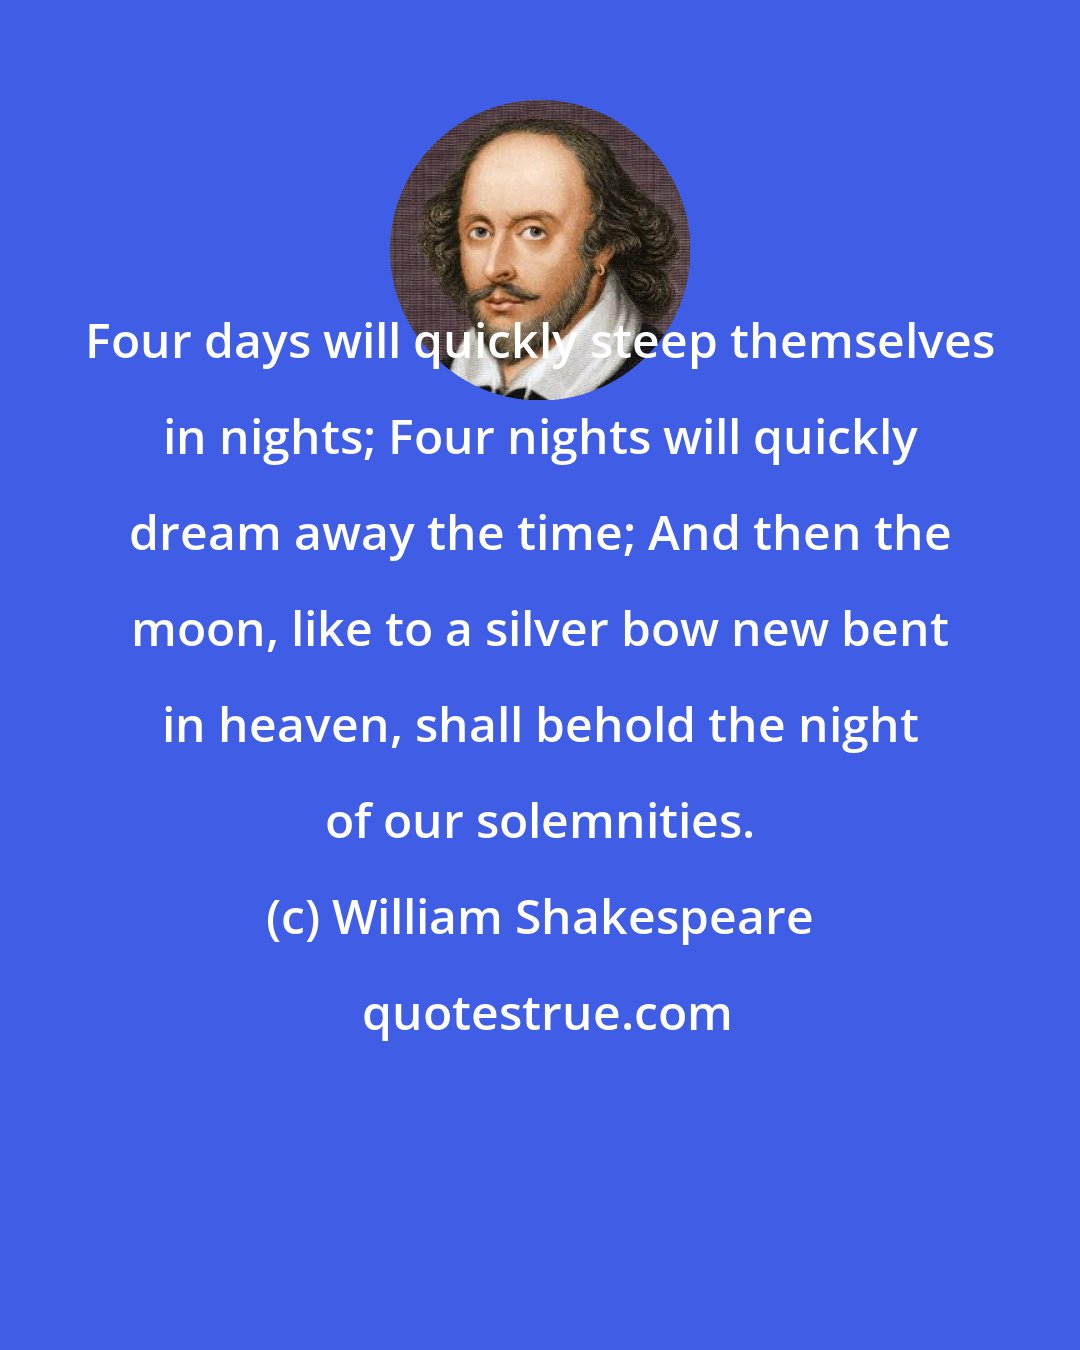 William Shakespeare: Four days will quickly steep themselves in nights; Four nights will quickly dream away the time; And then the moon, like to a silver bow new bent in heaven, shall behold the night of our solemnities.